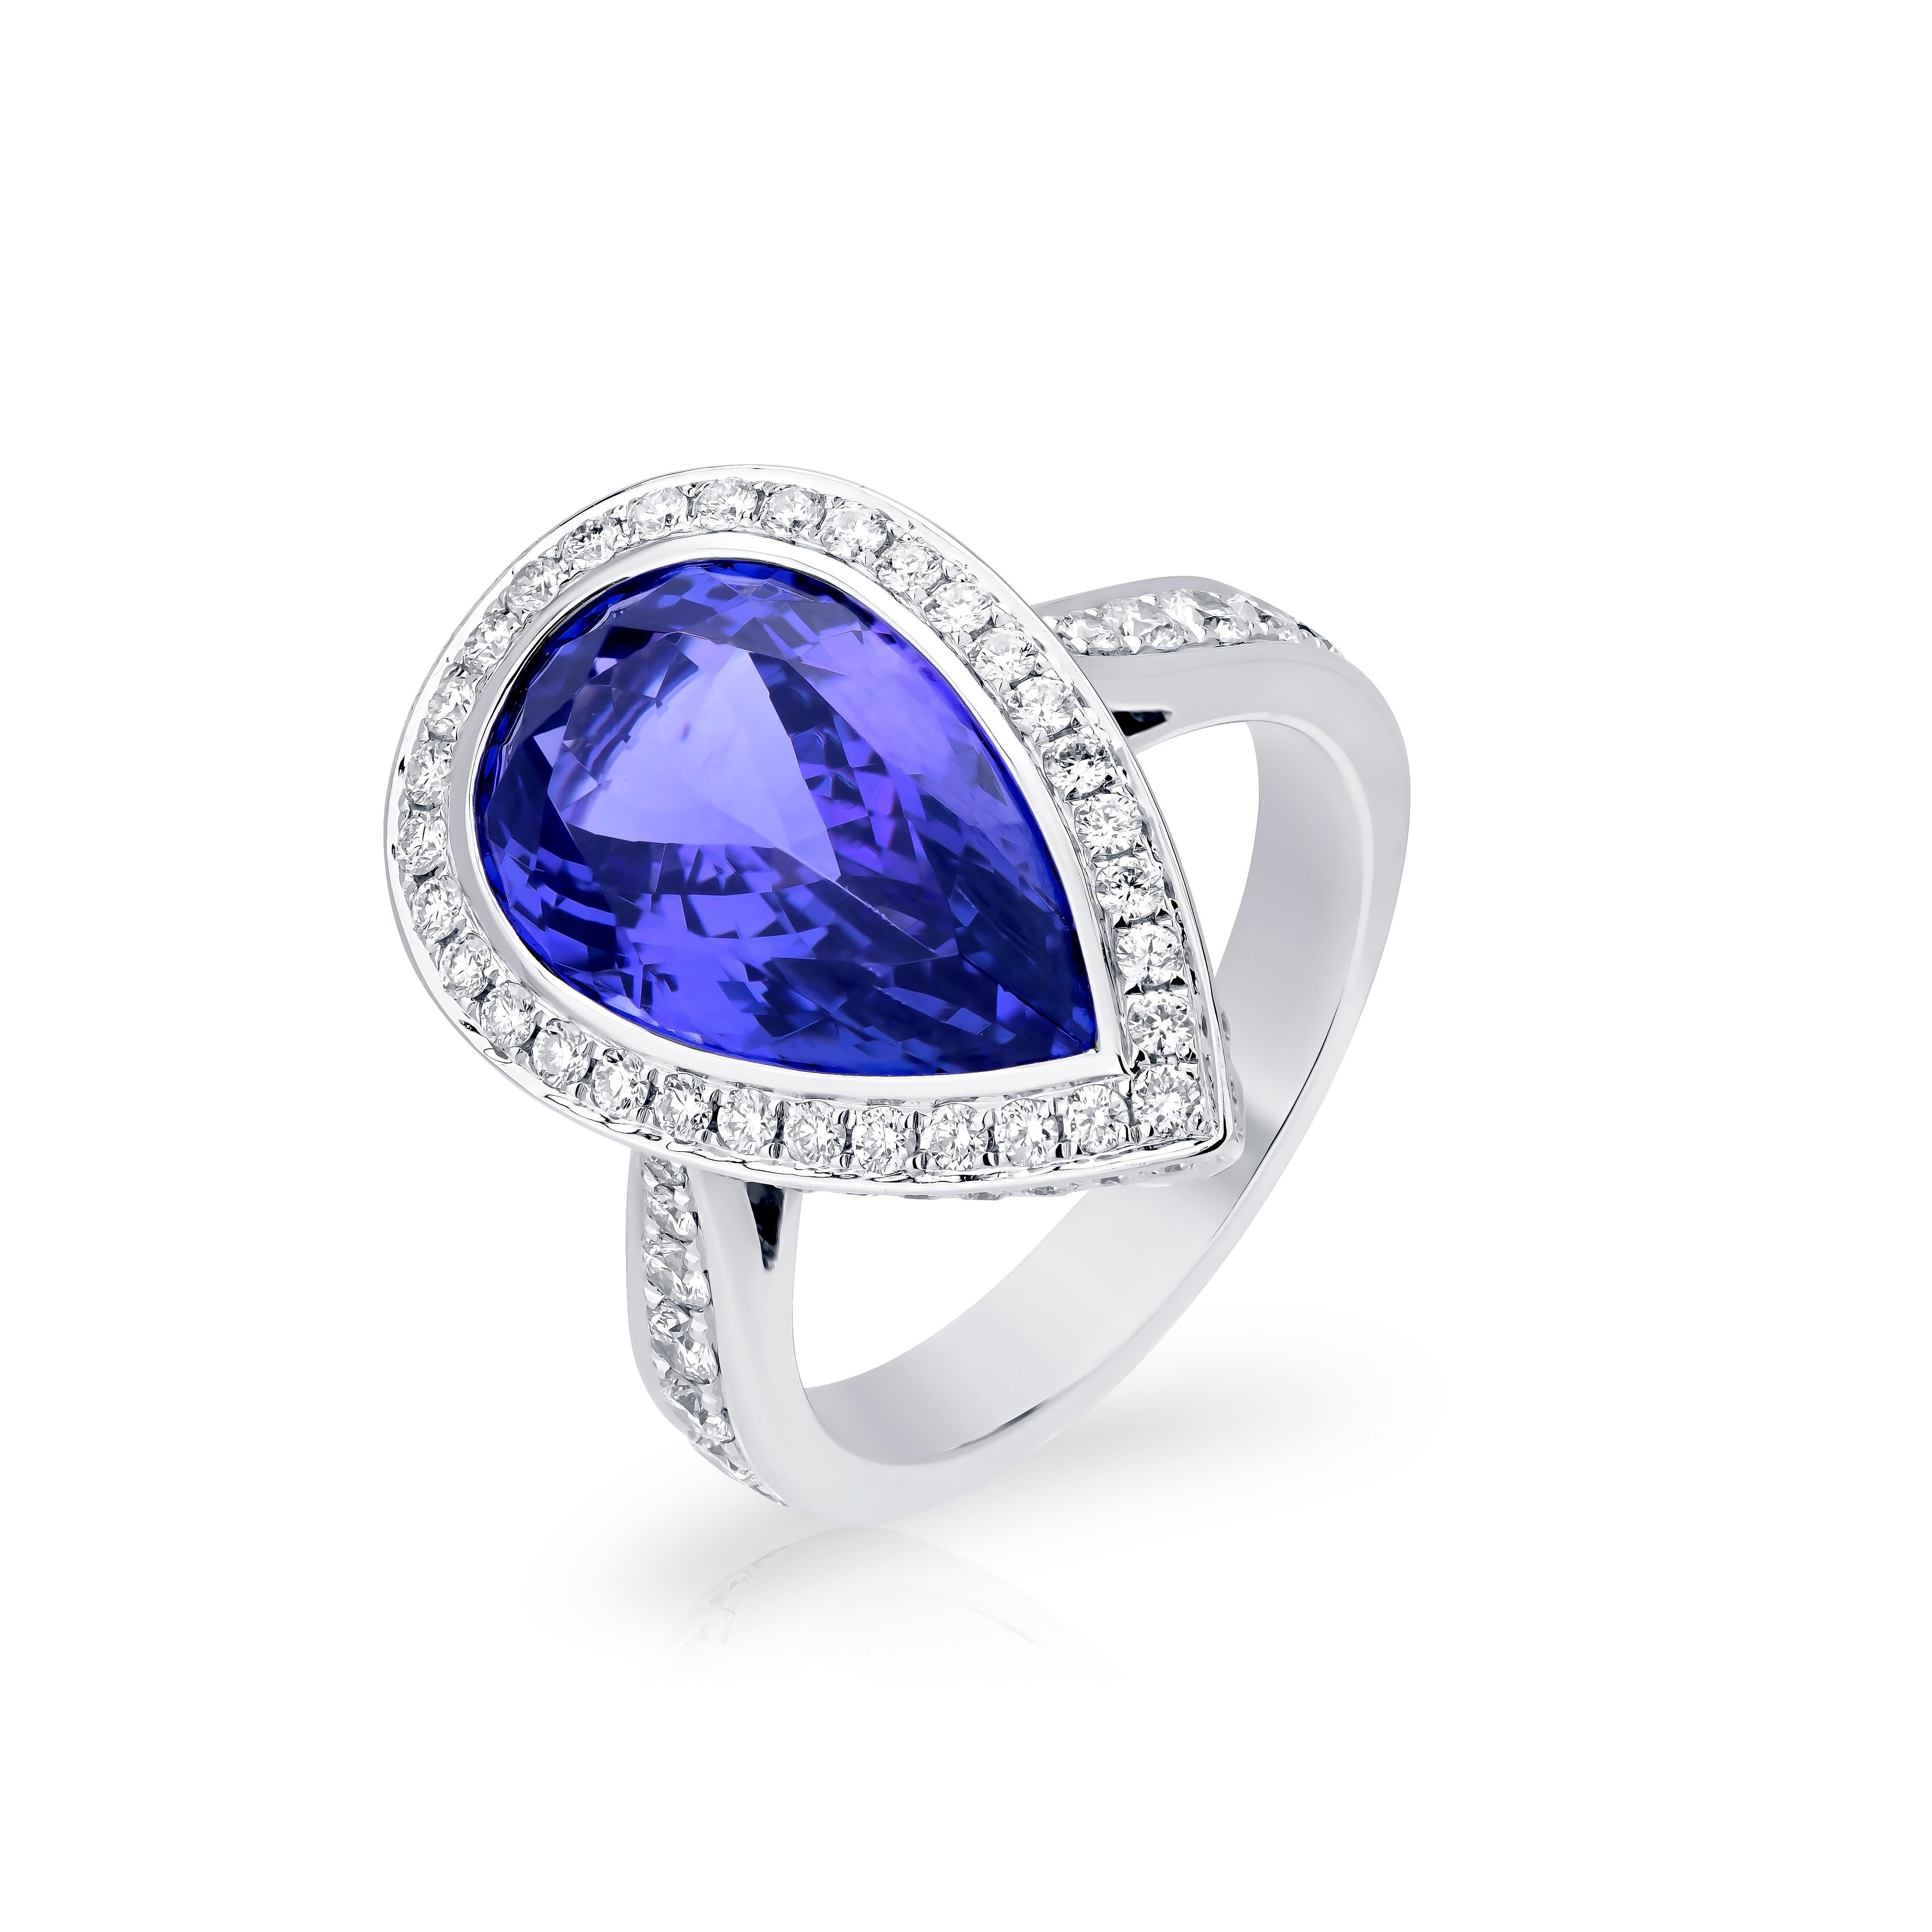 Bright and beautiful, this stunning ring is crafted in 18K White Gold by Nigaam. With a pear-shaped 7.26 Cts Tanzanite set in the center, this ring has been embedded with 1.03 Cts round full-cut diamonds around the center gemstone as well as on the